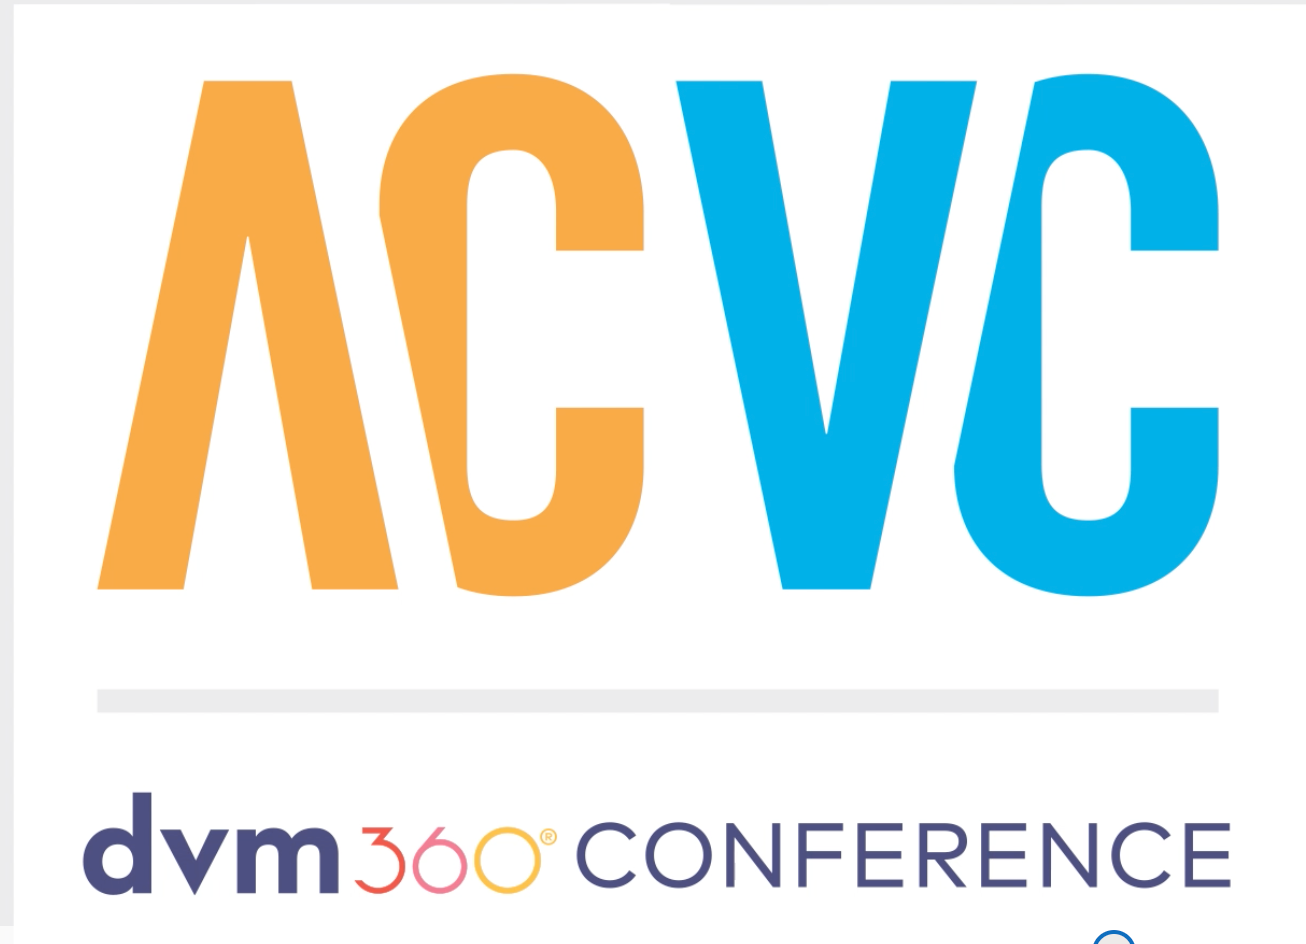 Today's Featured ACVC Sessions: 10/11